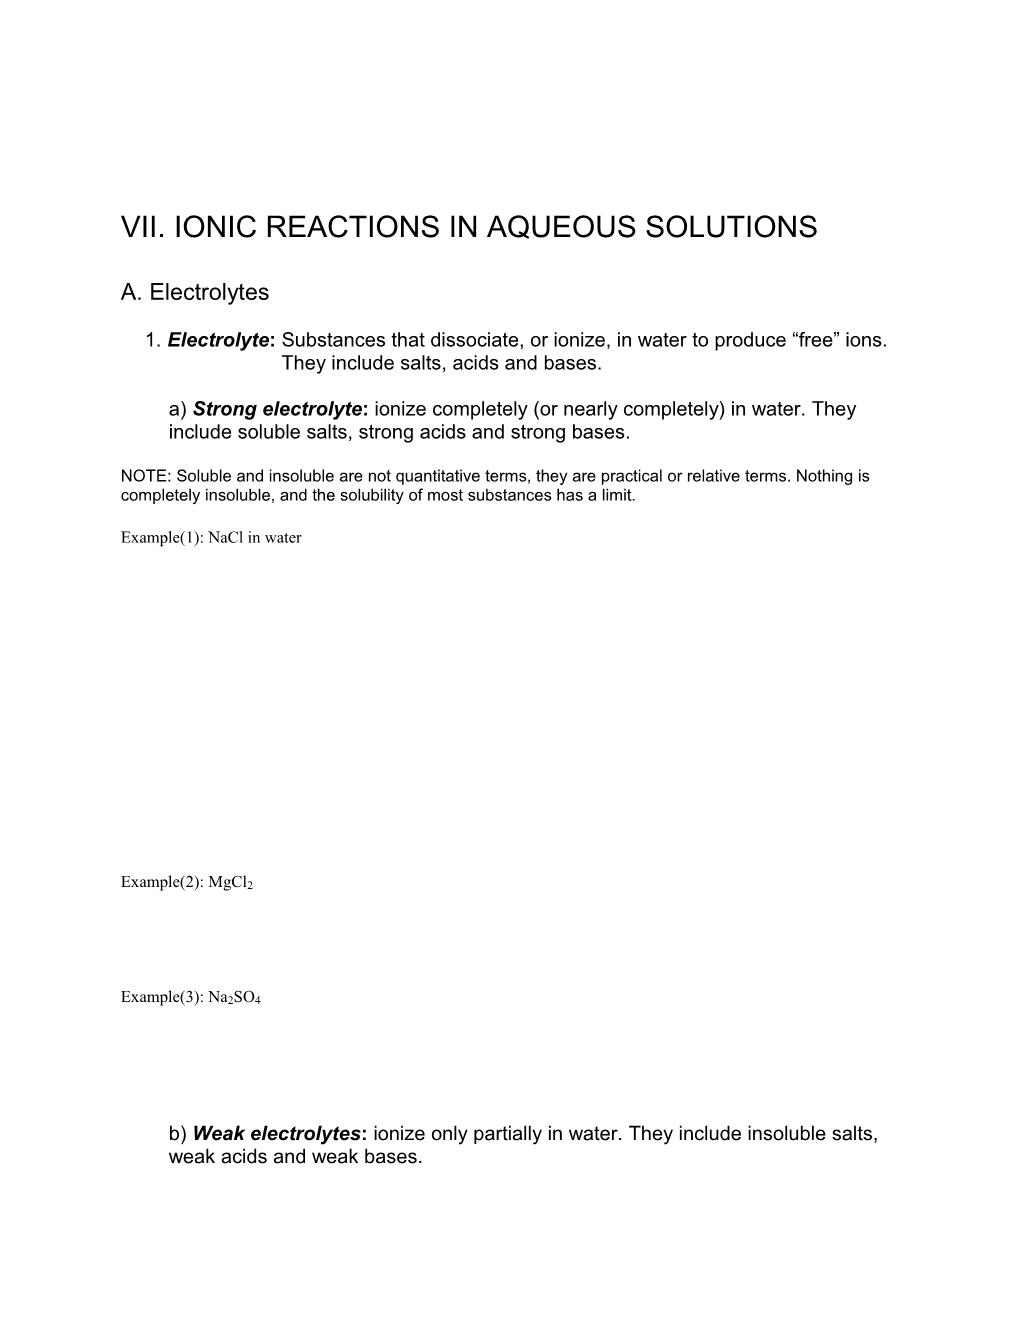 Vii. Ionic Reactions in Aqueous Solutions